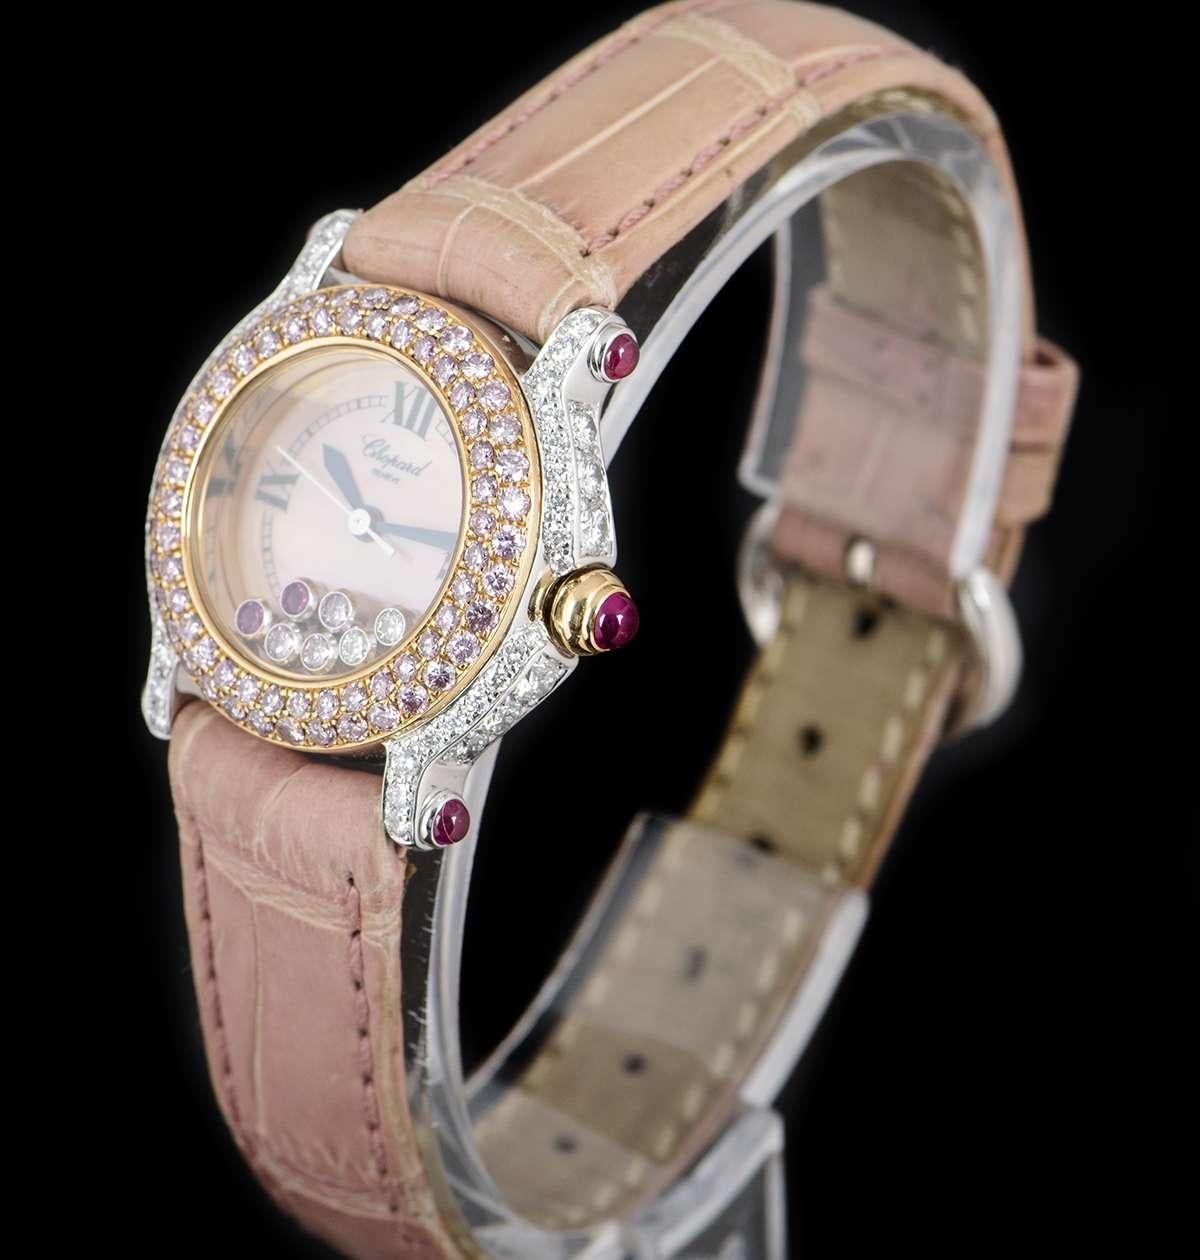 An 18k White Gold Happy Sport Ladies Wristwatch, pink mother of pearl dial with roman numerals III, VI, IX & XII, 2 floating rubover round brilliant cut rubies, 3 floating rubover round brilliant cut pink diamonds & 2 floating rubover round